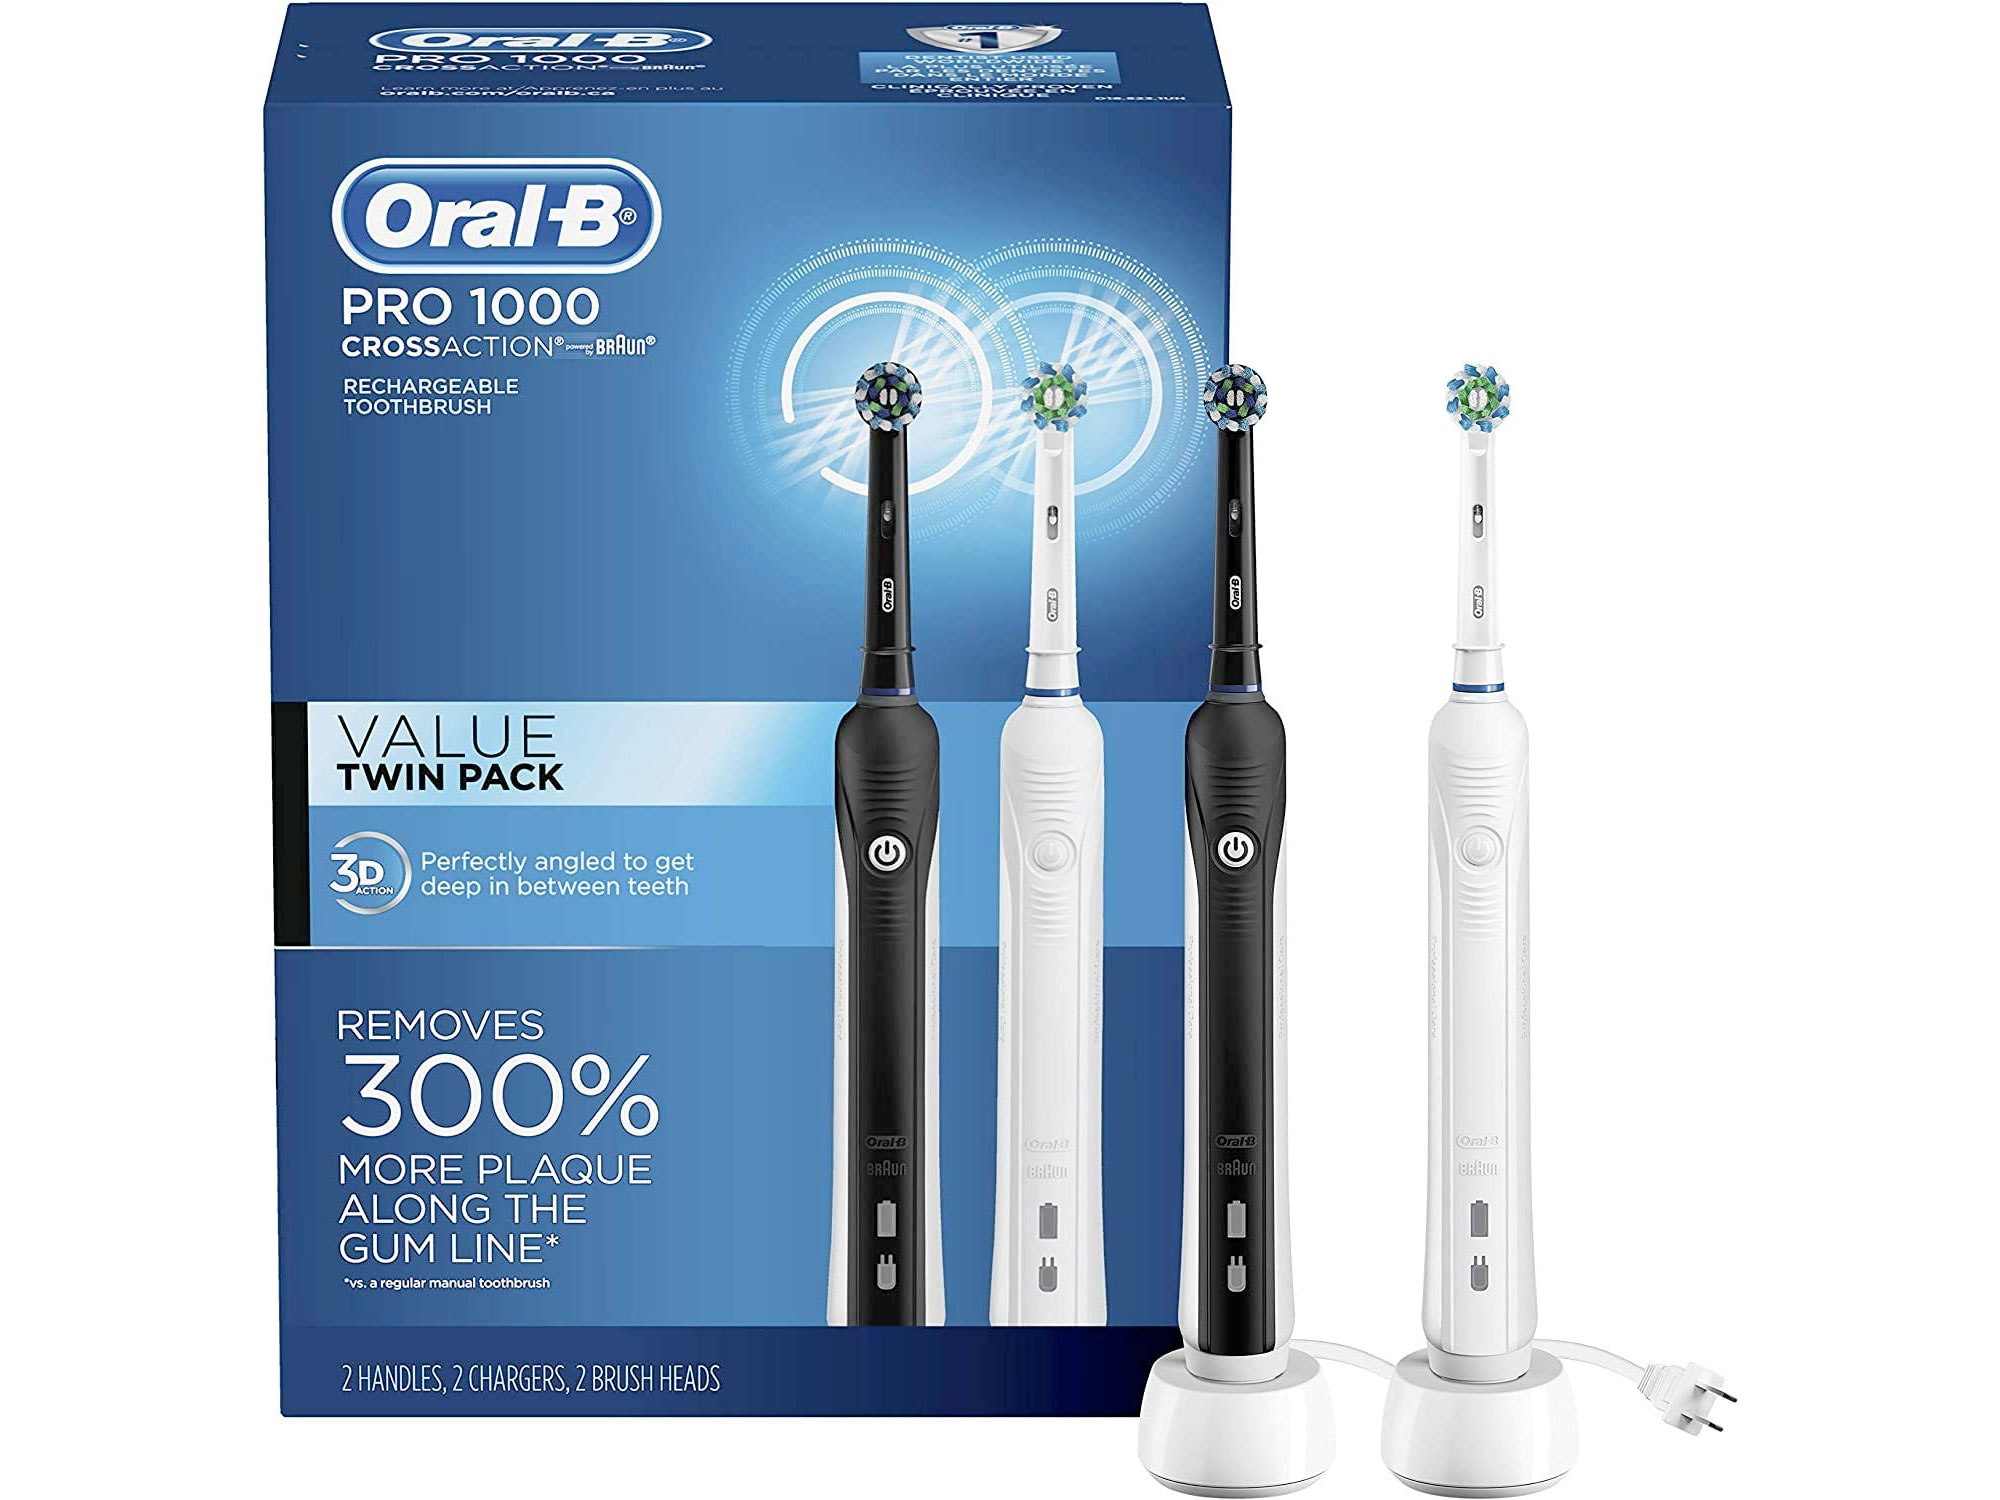 Amazon：Oral-B Pro 1000 CrossAction Electric Toothbrush (2 Count)只賣$119.99